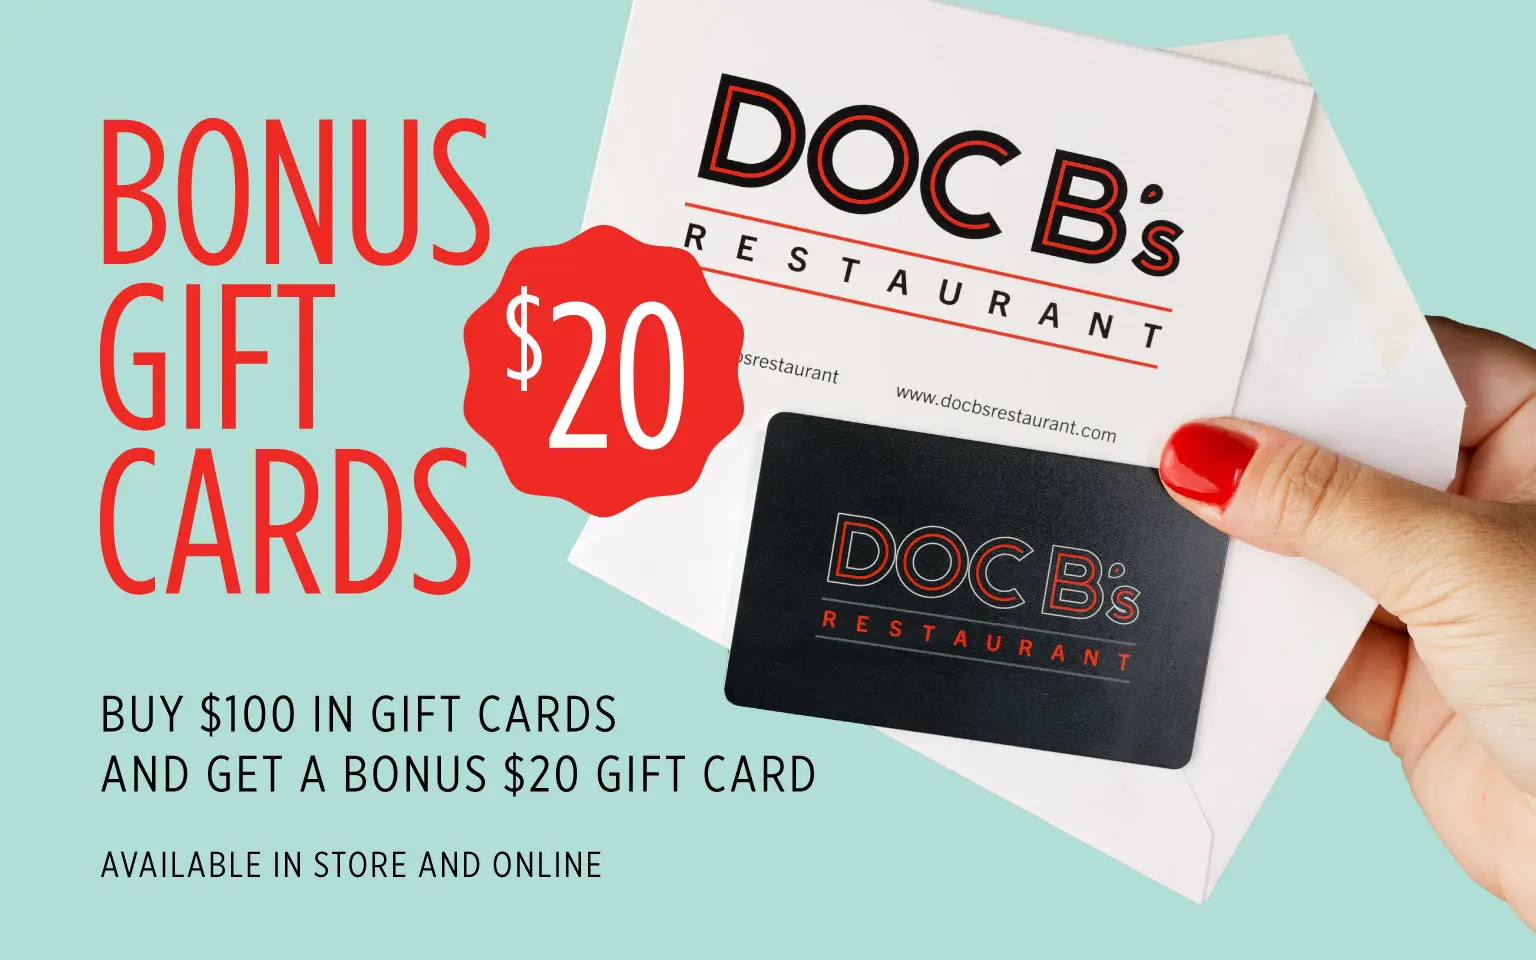 Bonus $25 for every $100 in gift card purchases